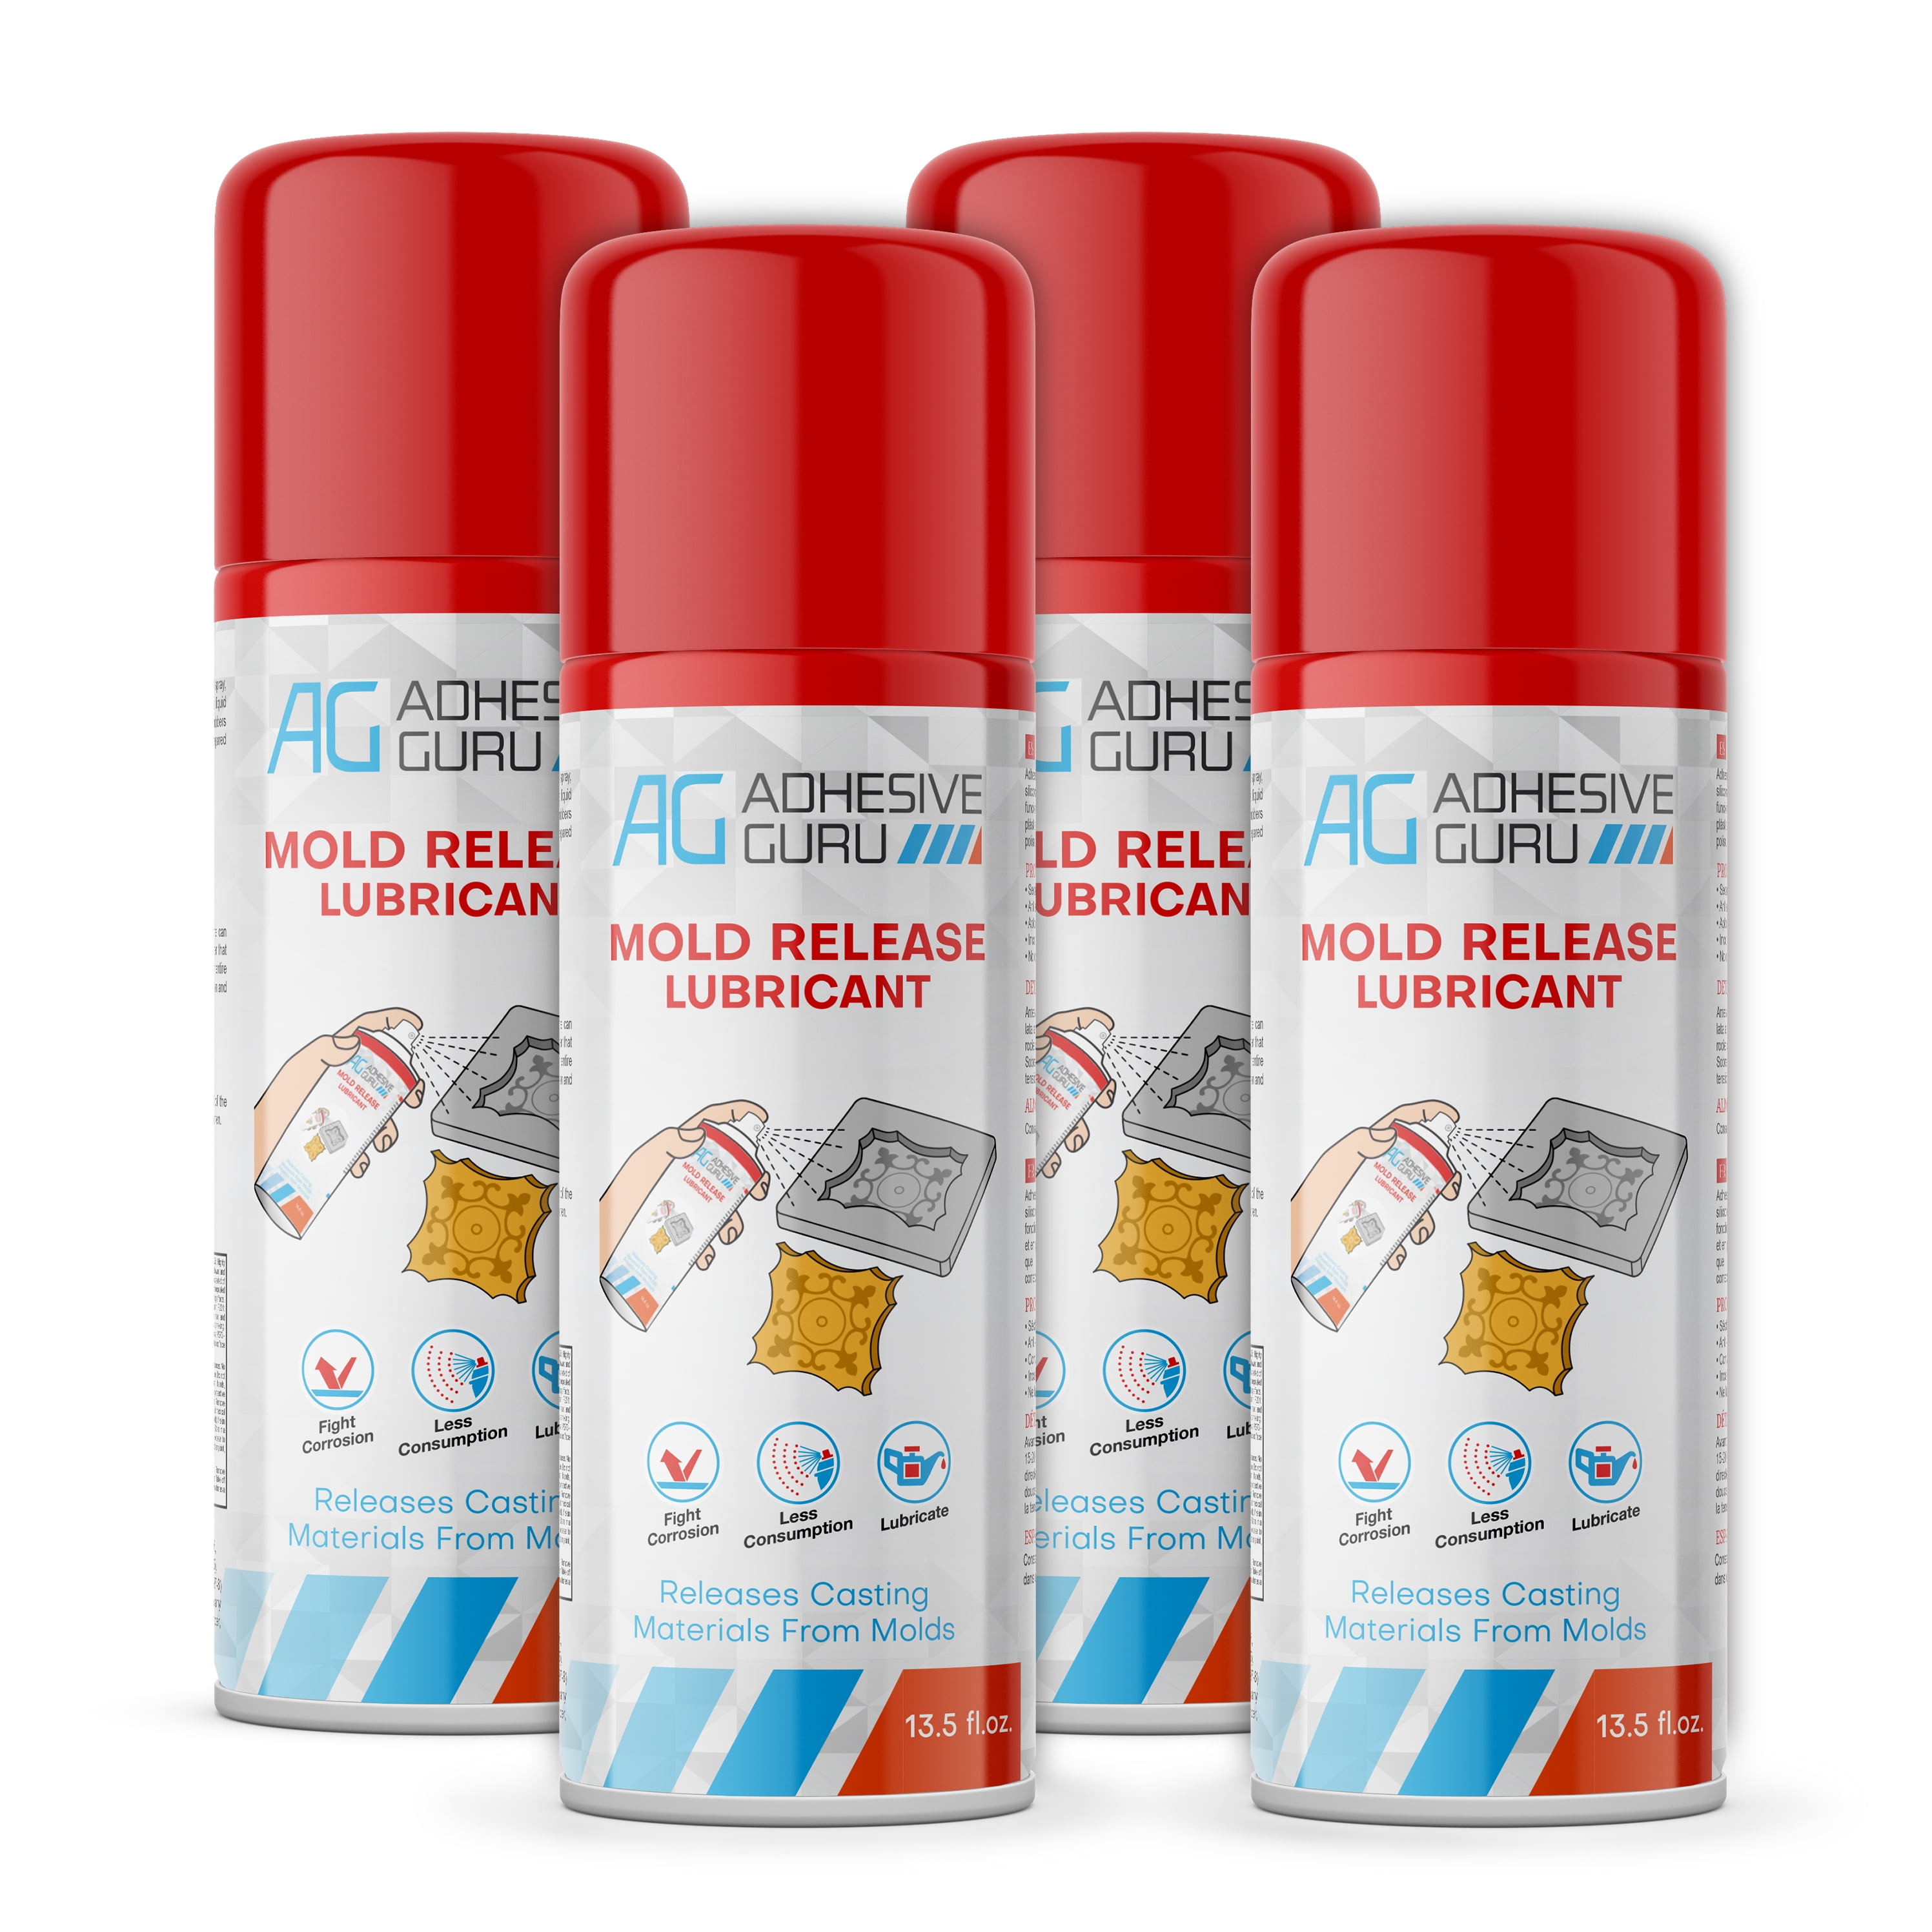 TRI - EPOXY Mold Release Spray 11oz Spray Can - Sold Individually #5940310  - Mold release separator lubricant deflasking medium #5940310 